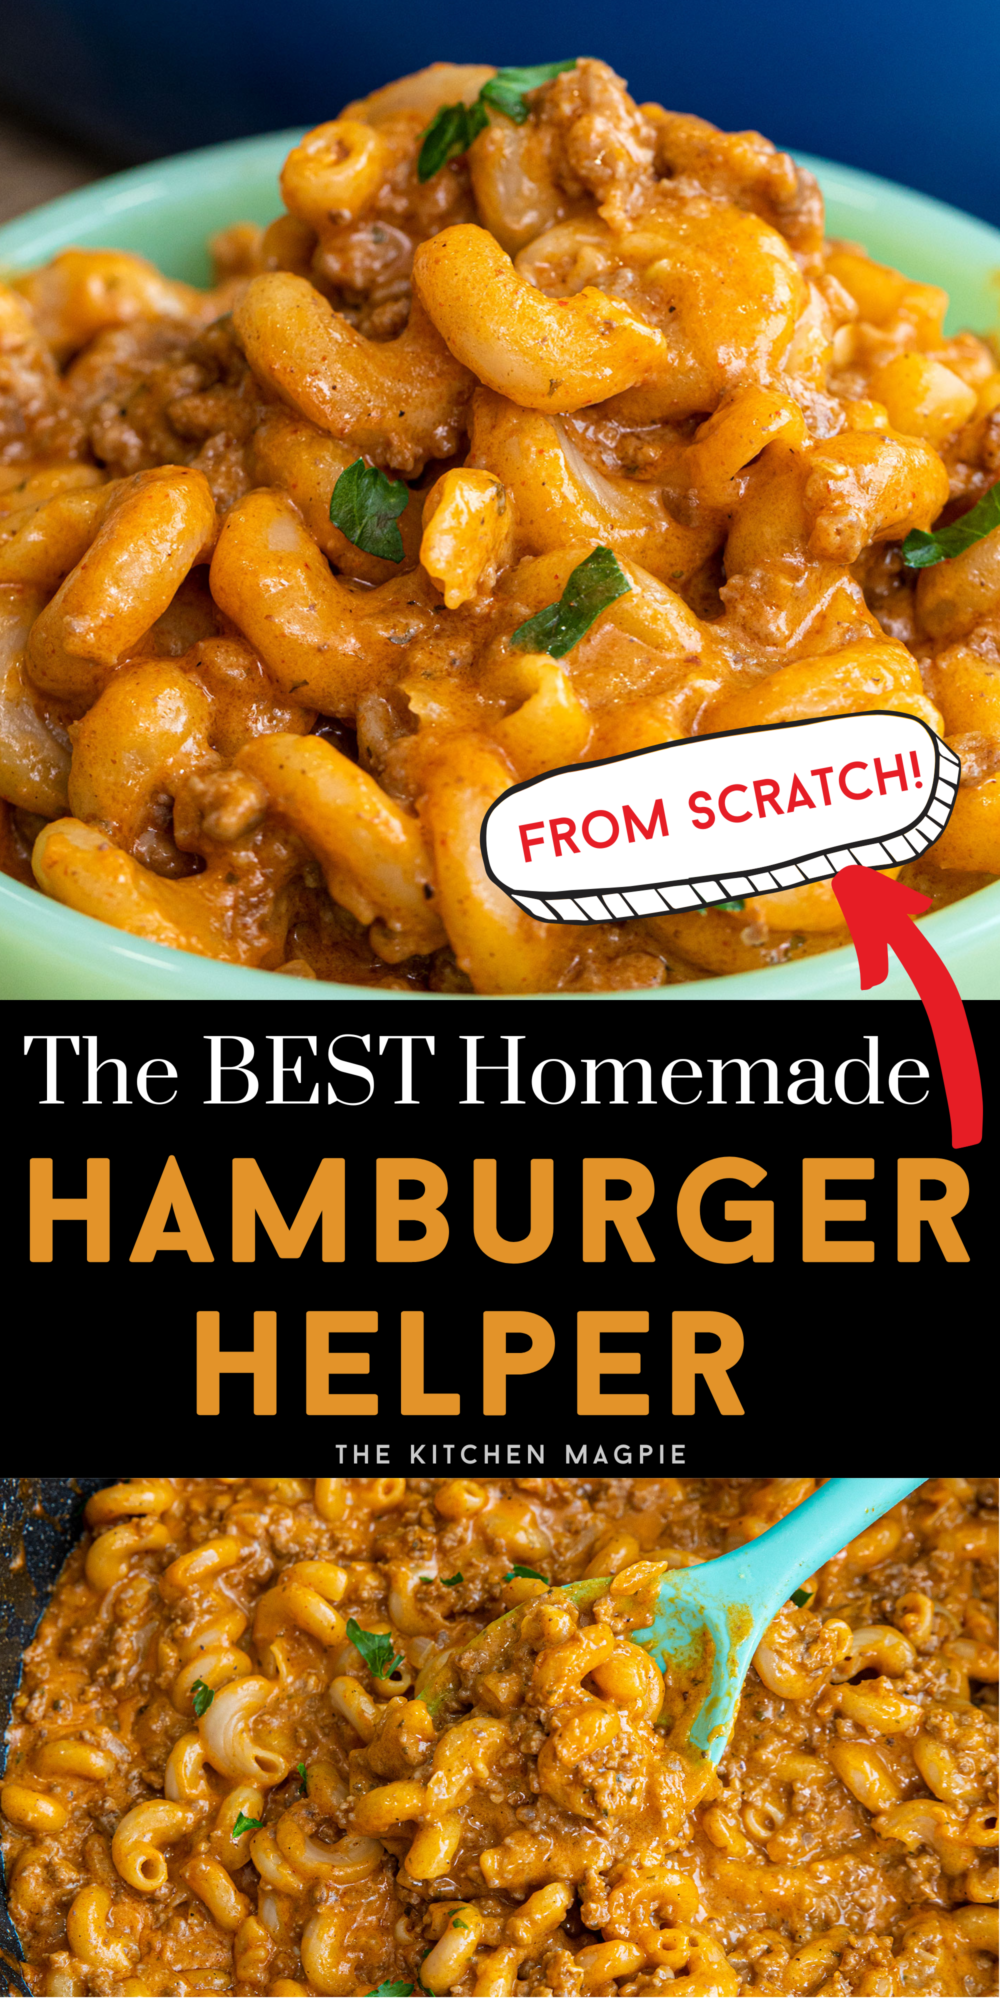 How to make homemade hamburger helper instead of using the box mix. Rich and creamy, this is best served with a light side dish like salad for a complete dinner.